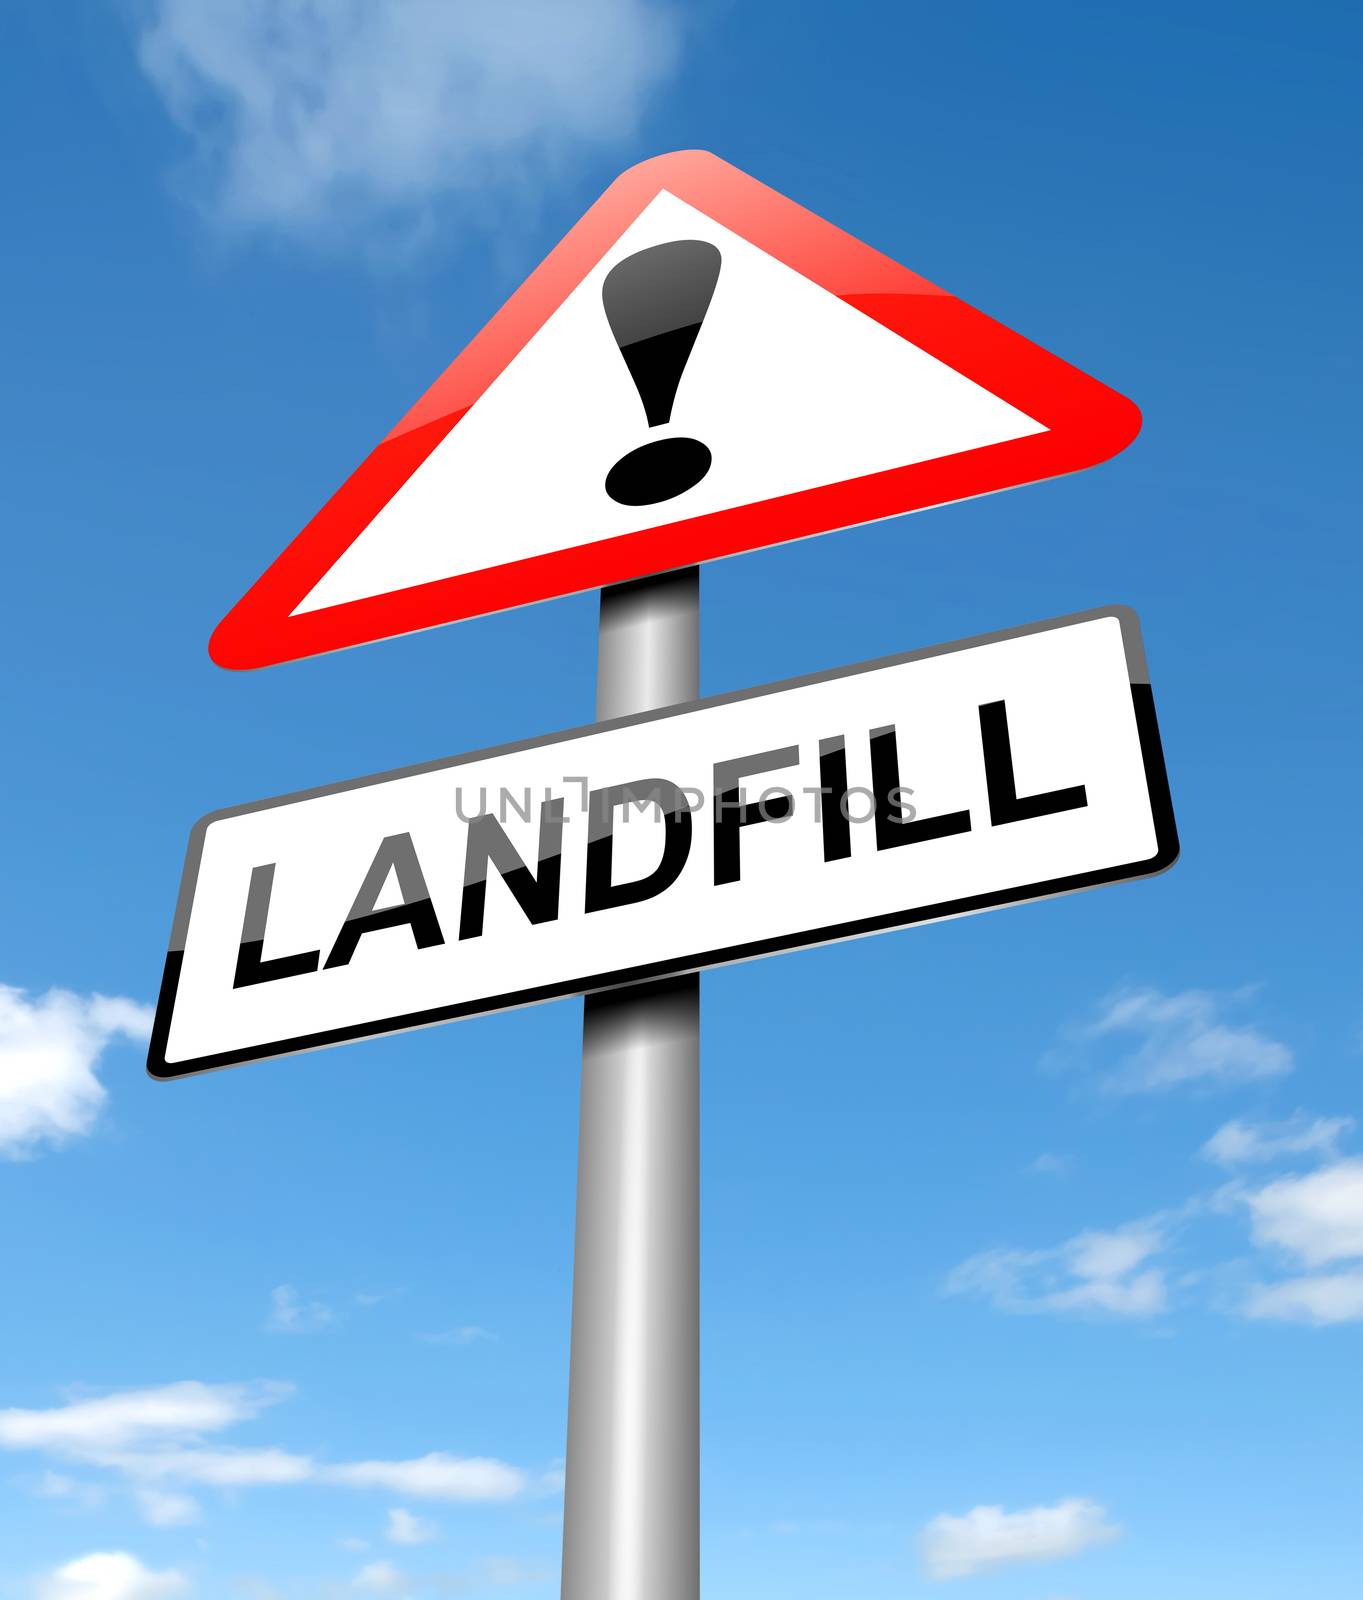 Landfill Sign. by 72soul